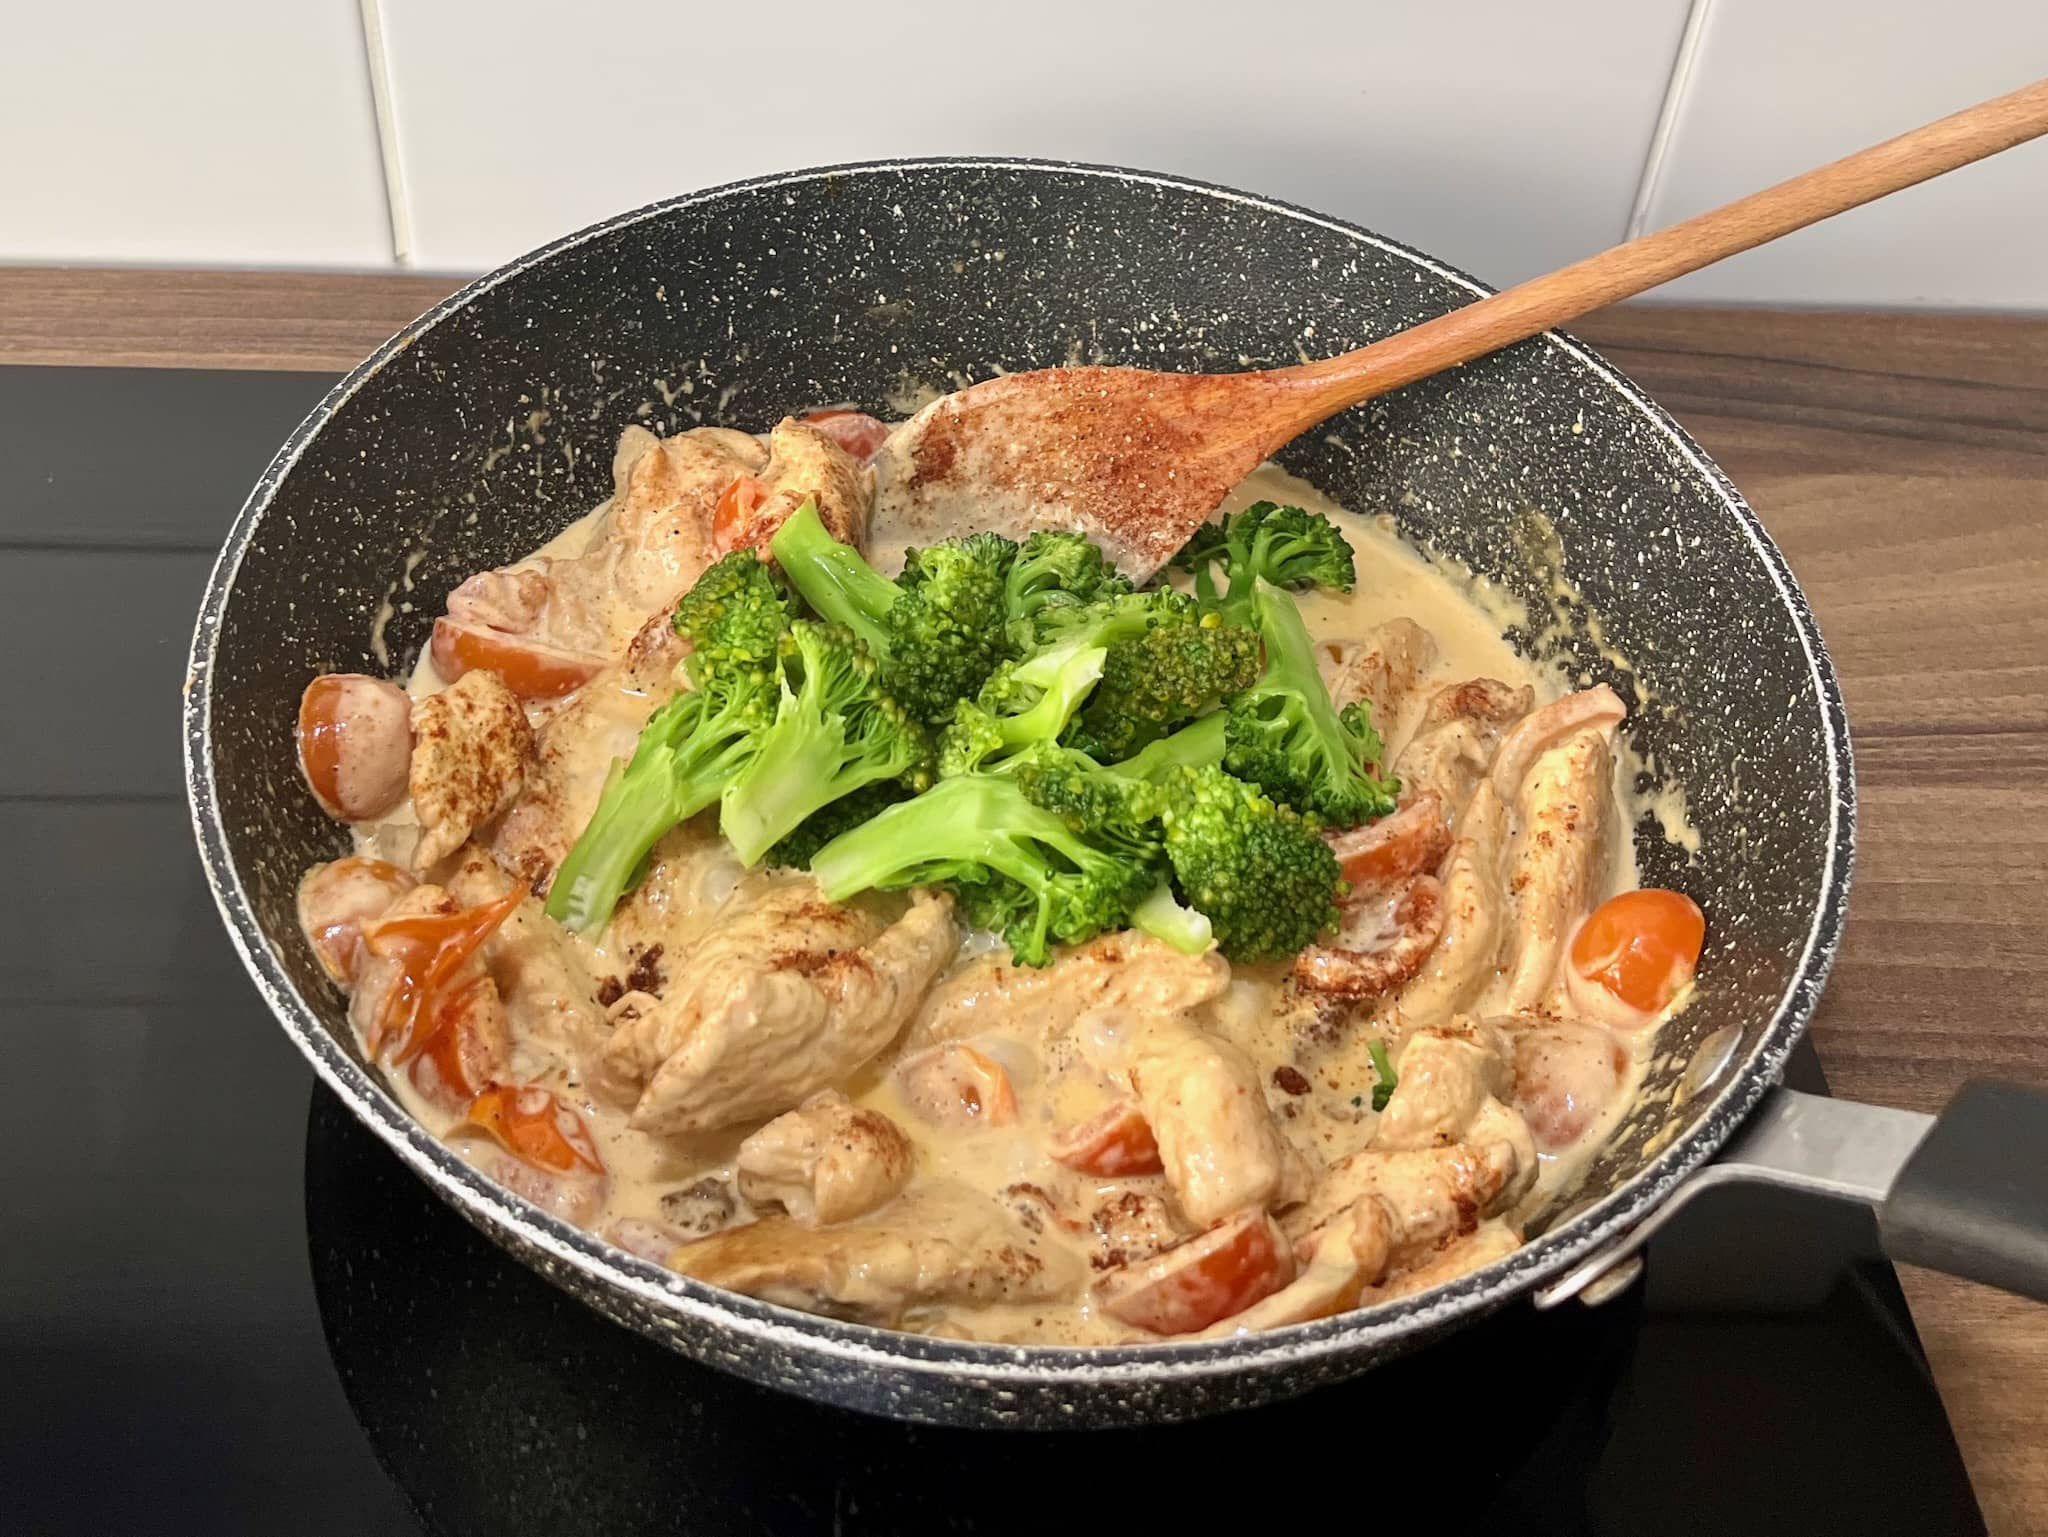 Broccoli florets added to chicken and cherry tomatoes in a large skillet, cooked until tender.